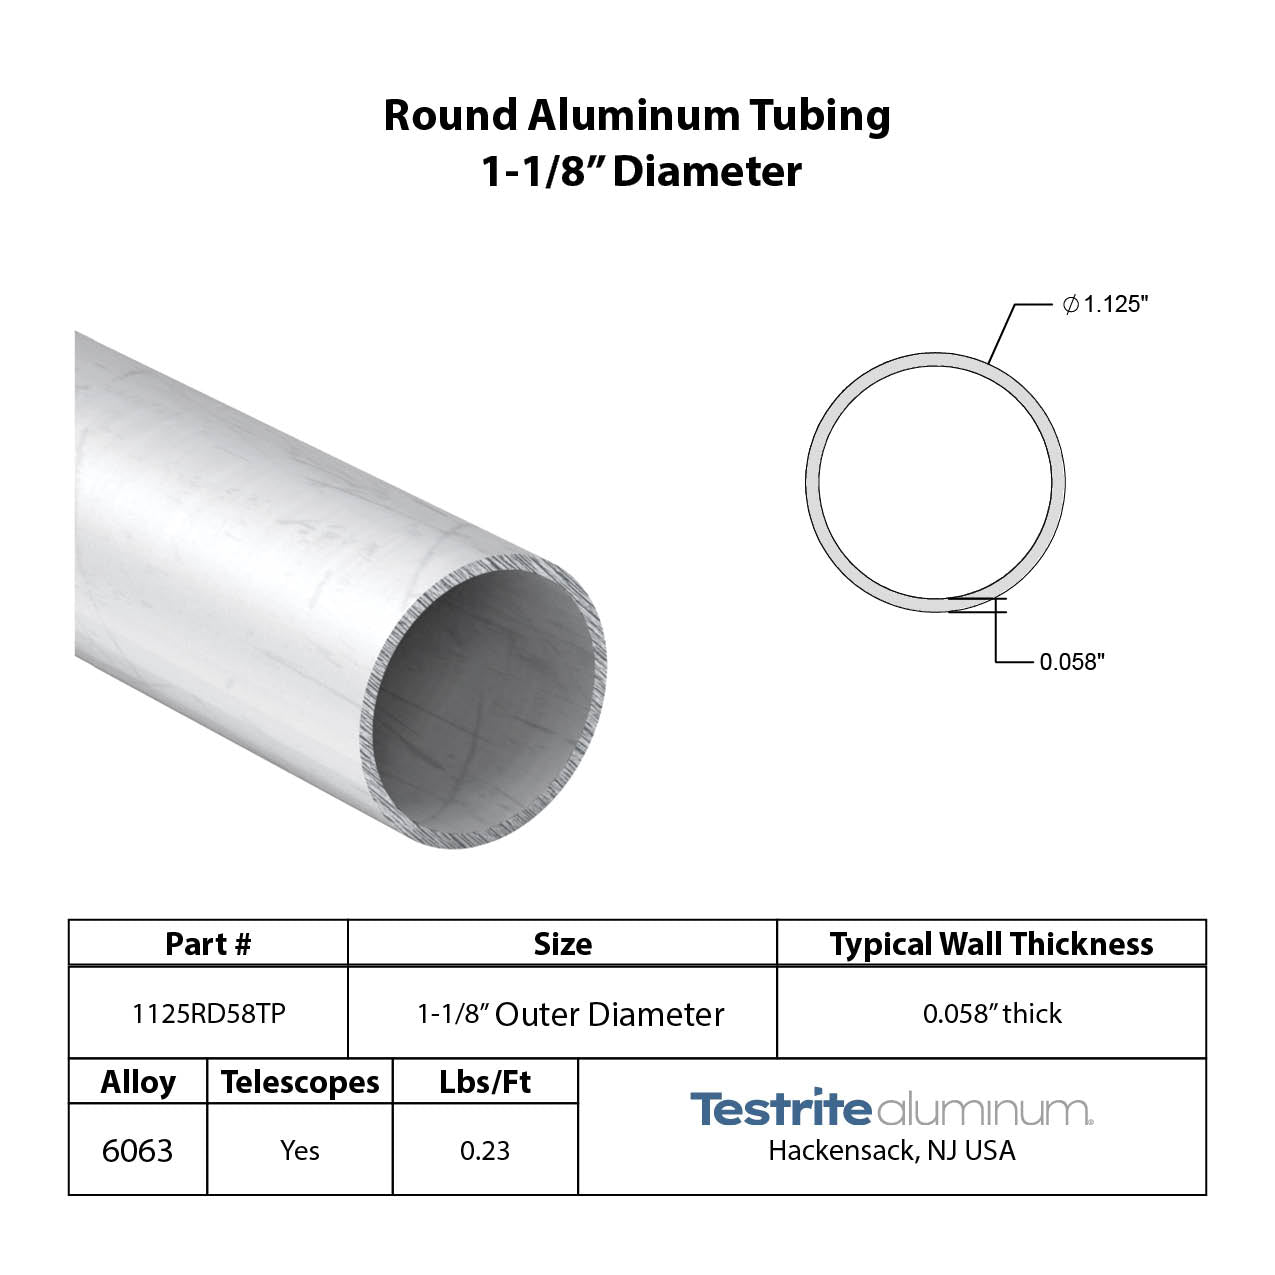 Specifications for 1-1/8" OD x .058" Wall Drawn Round Aluminum Tubing Telescopic, 1.125" OD x .058" wall round aluminum tube, designed to fit inside our 1-1/4" OD x .058" wall tube and to accept our 1" OD x .058" Wall tube inside of it, all telescoping compatible